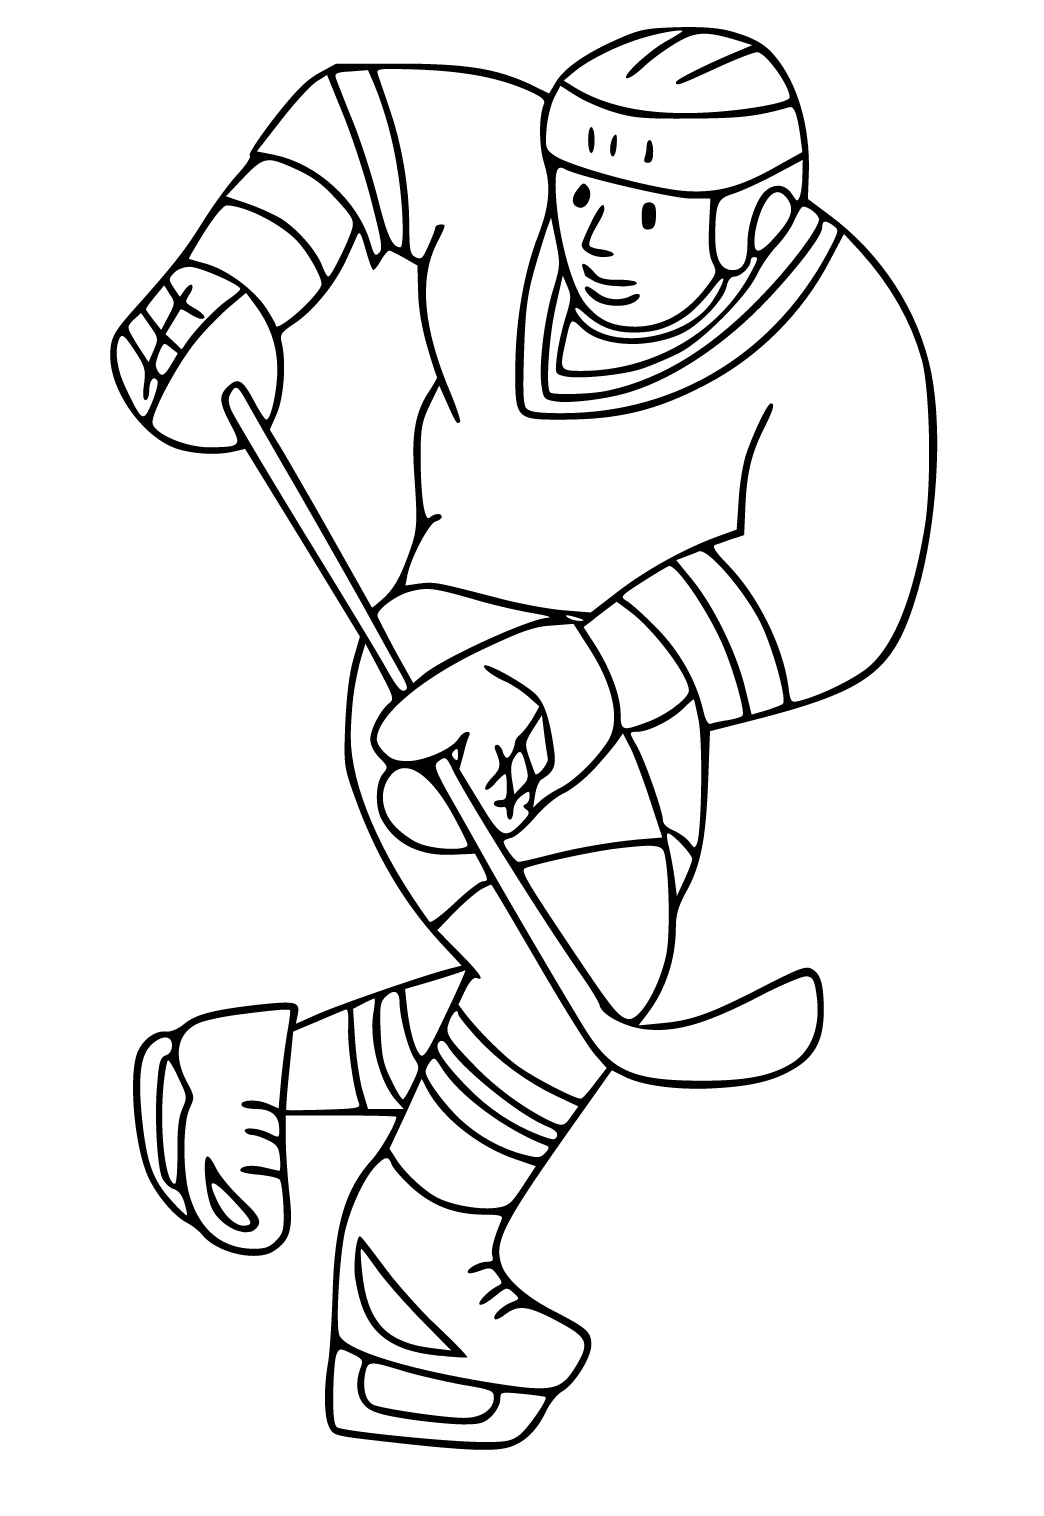 hockey player coloring page